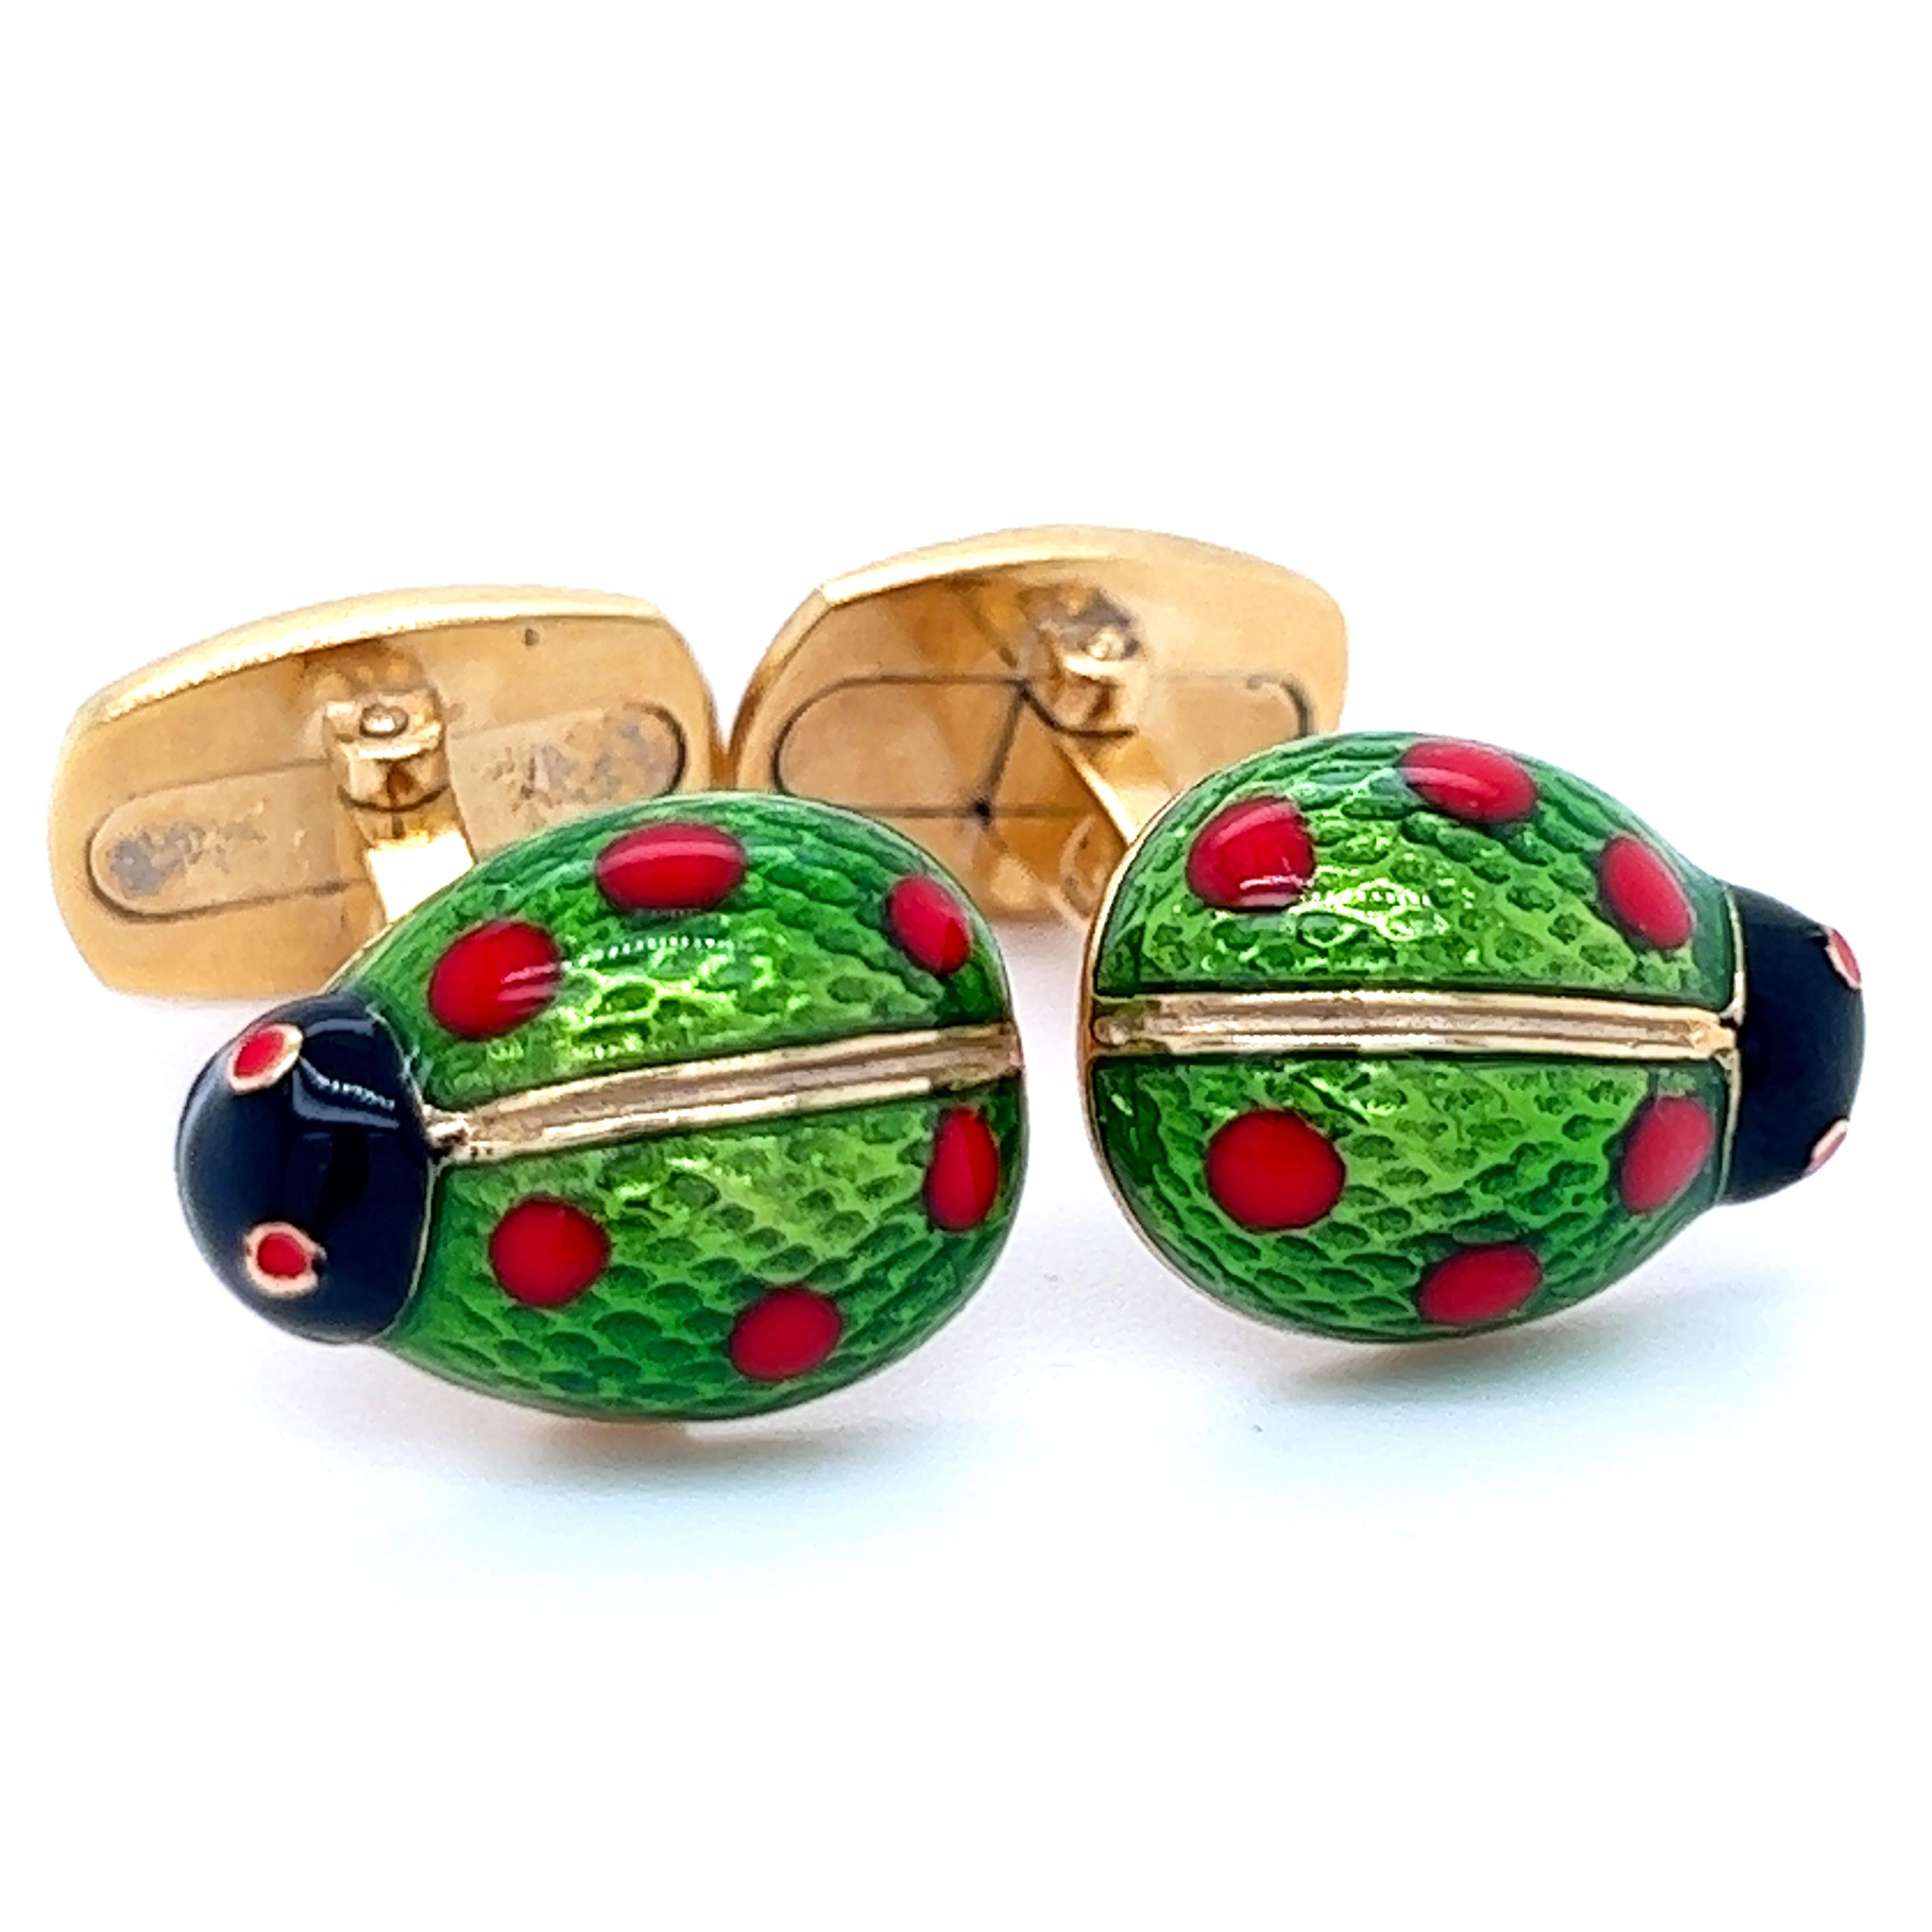 Green with Red Spot Hand Enameled Chic Little Ladybug Shaped T-Bar Back, Sterling Silver Gold Plated Cufflinks.
In our smart Black Box and Pouch.

